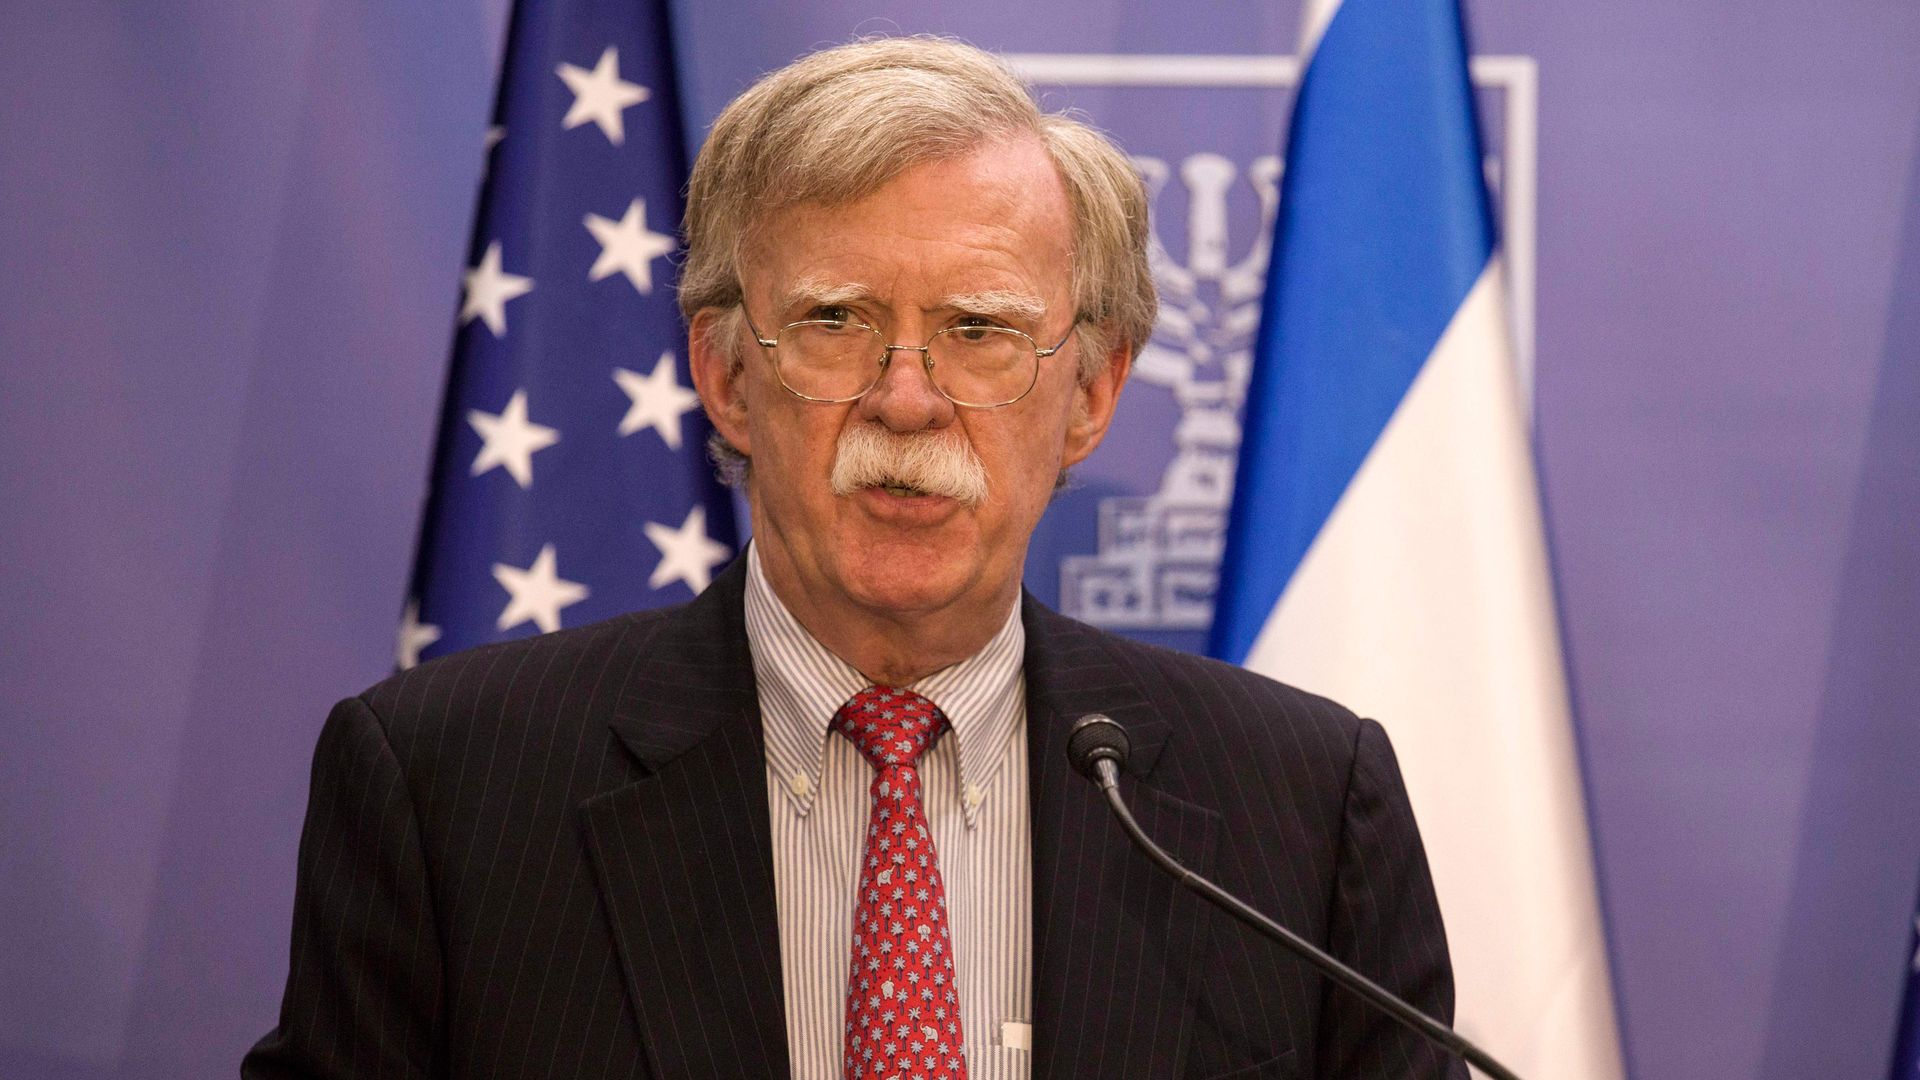 John Bolton says military action against Iran is still on the table - Axios1920 x 1080